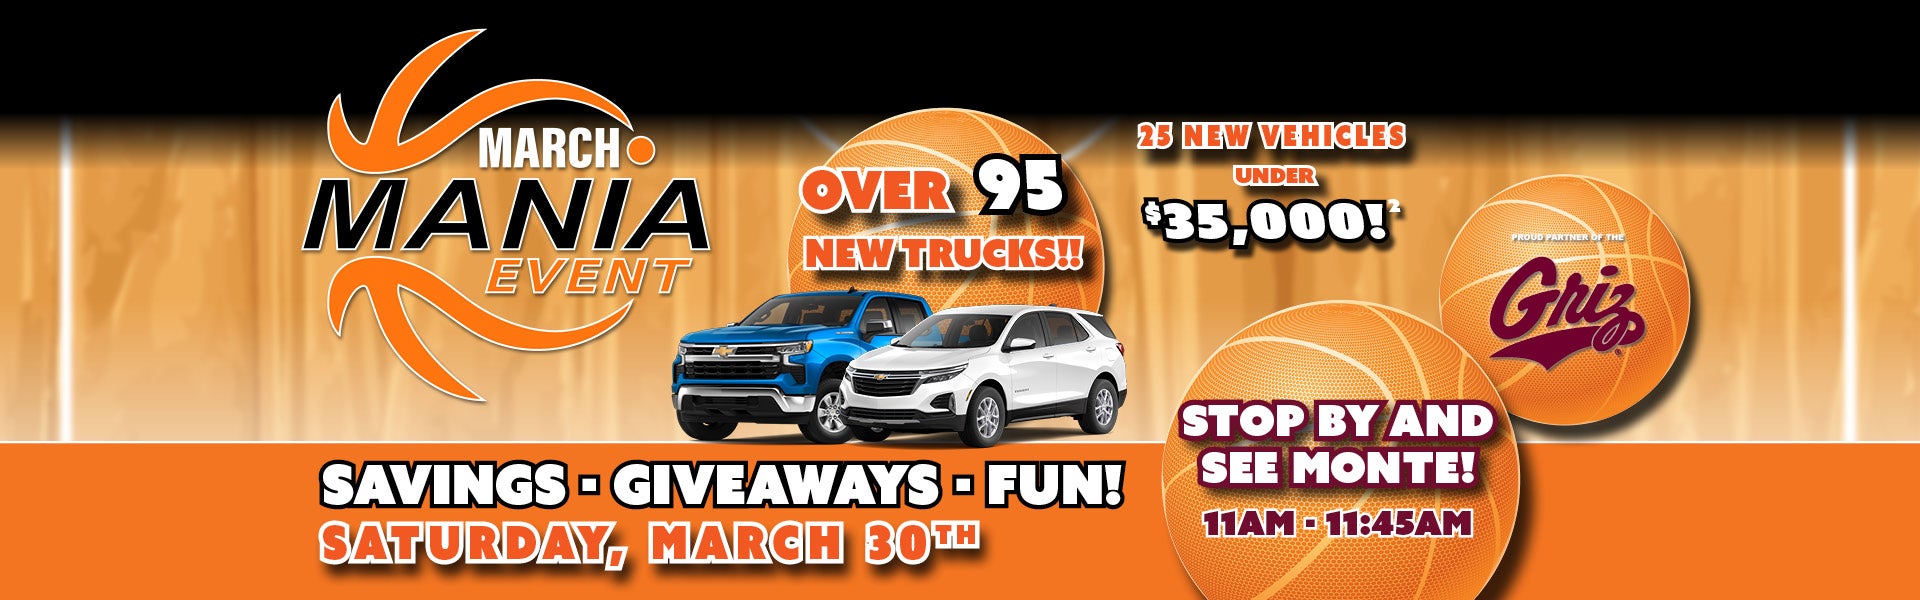 March Mania Event